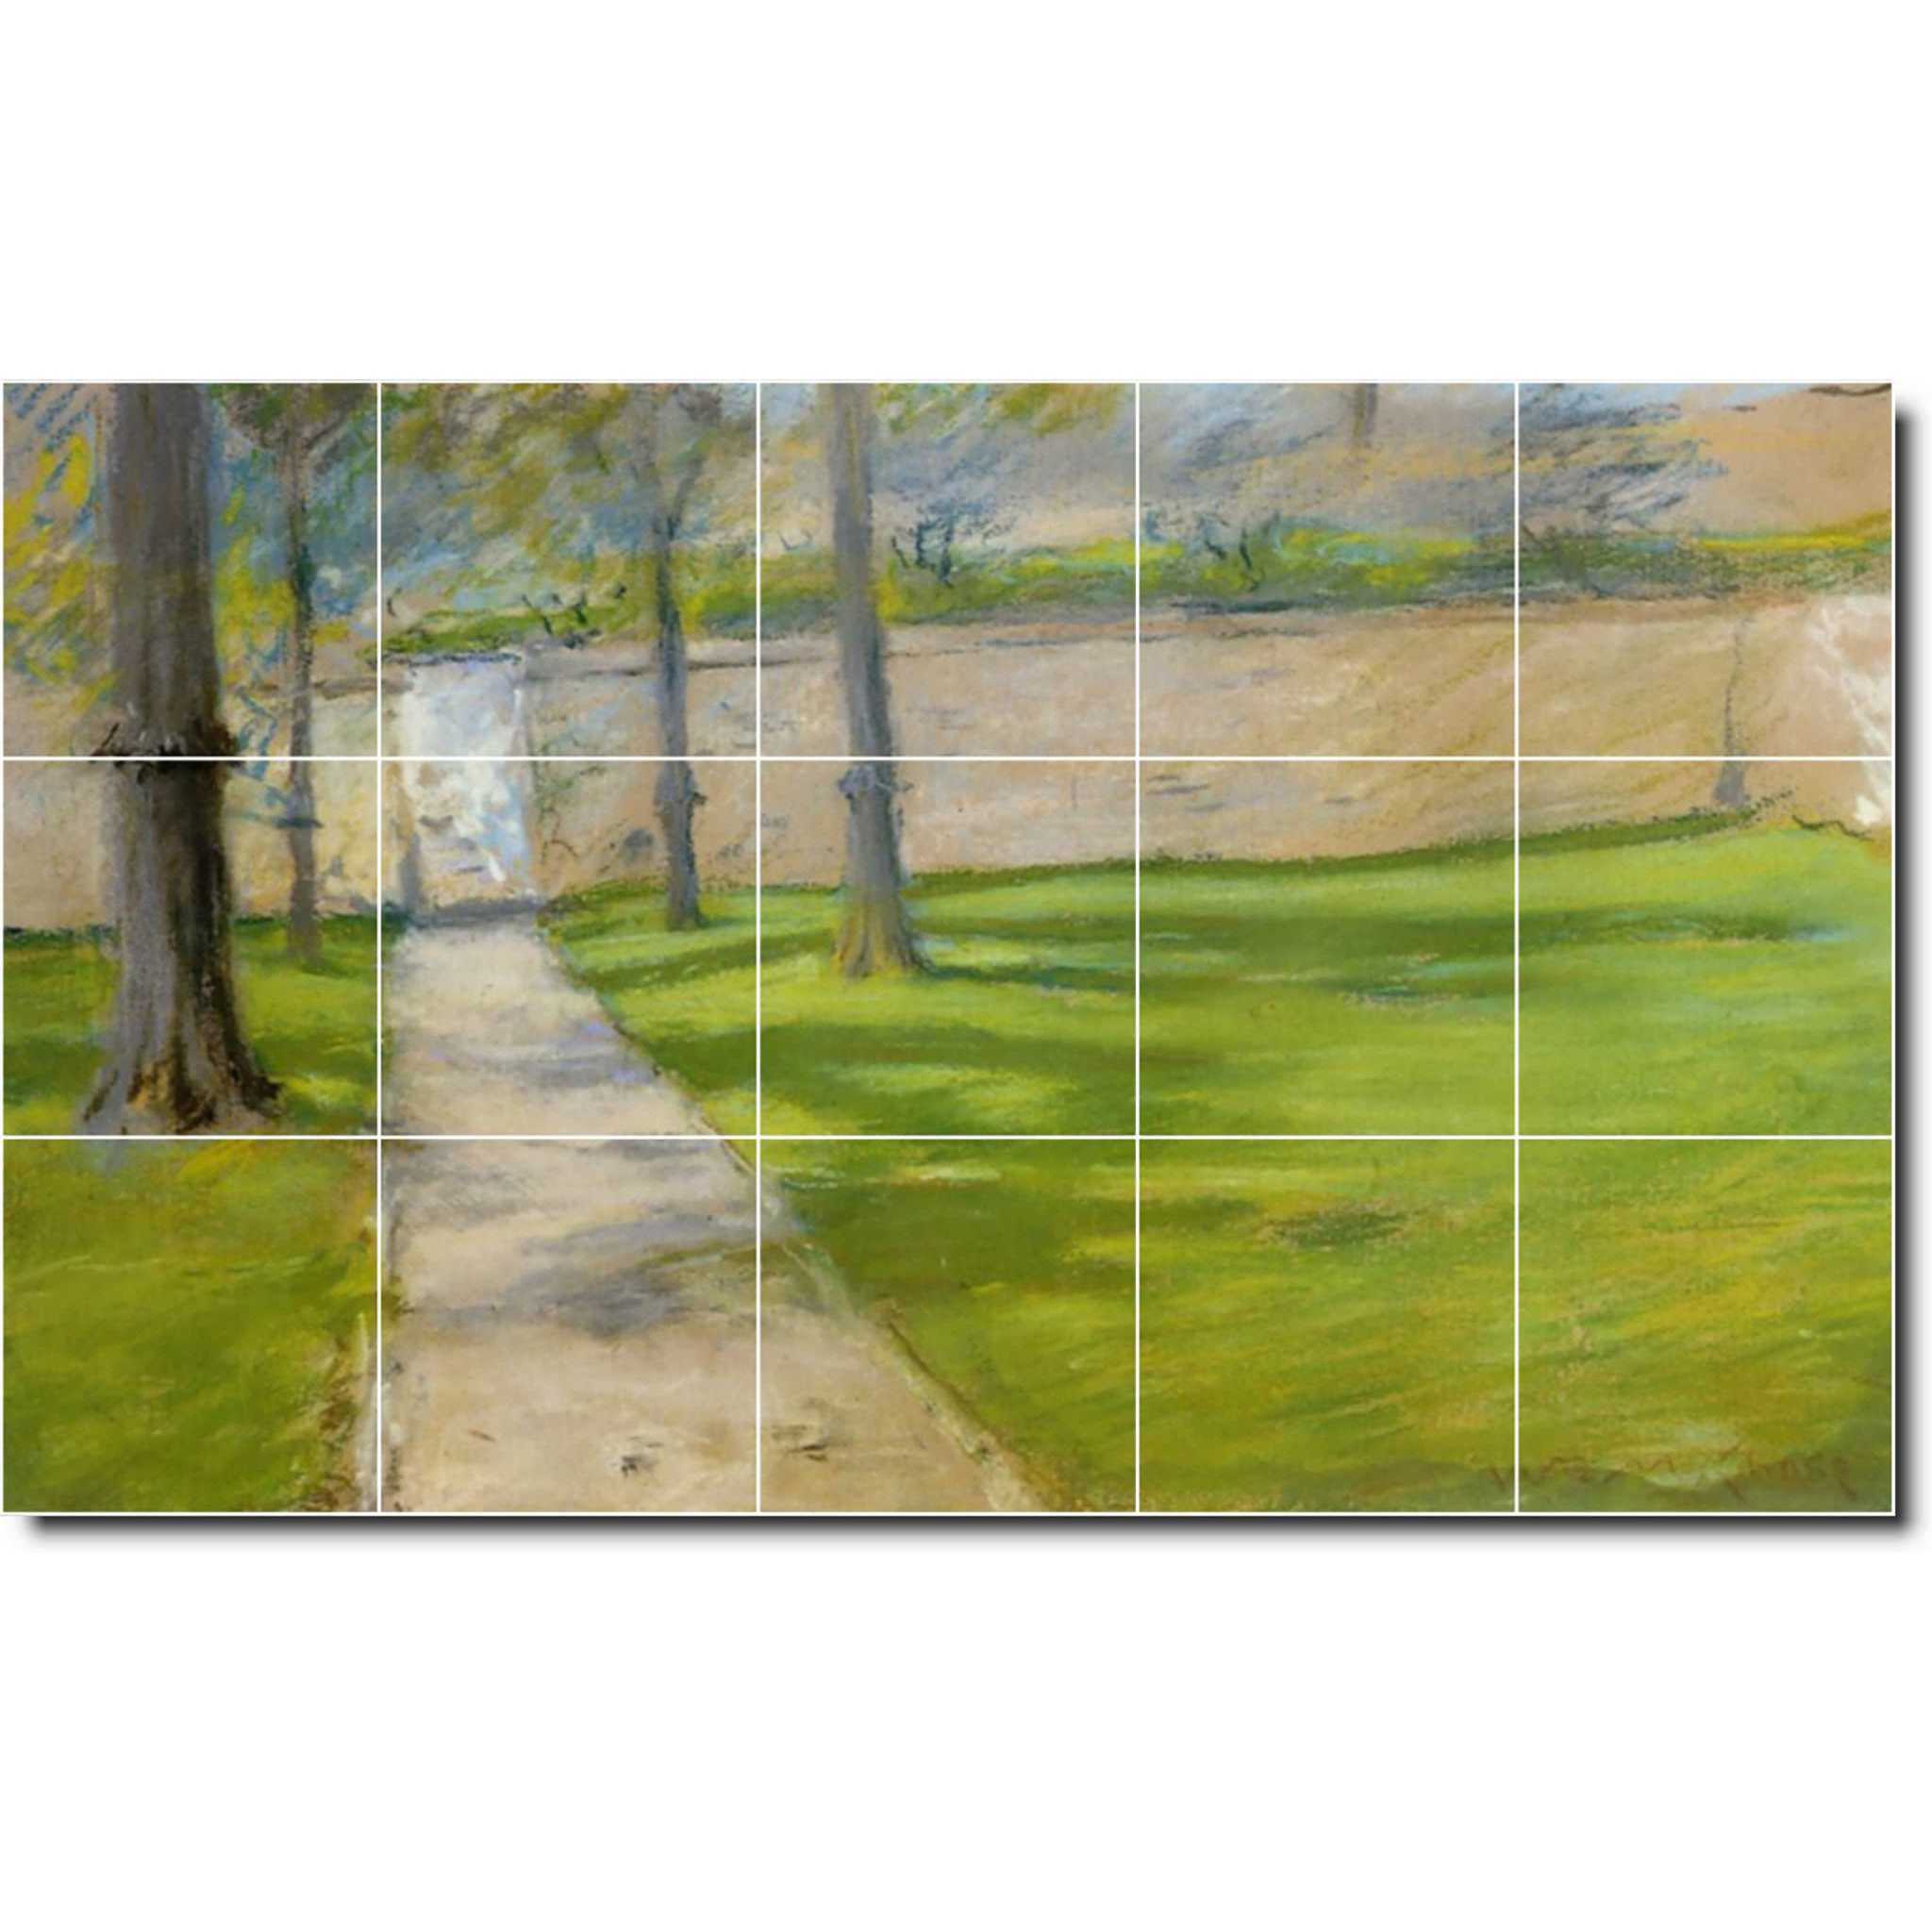 william chase country painting ceramic tile mural p01464